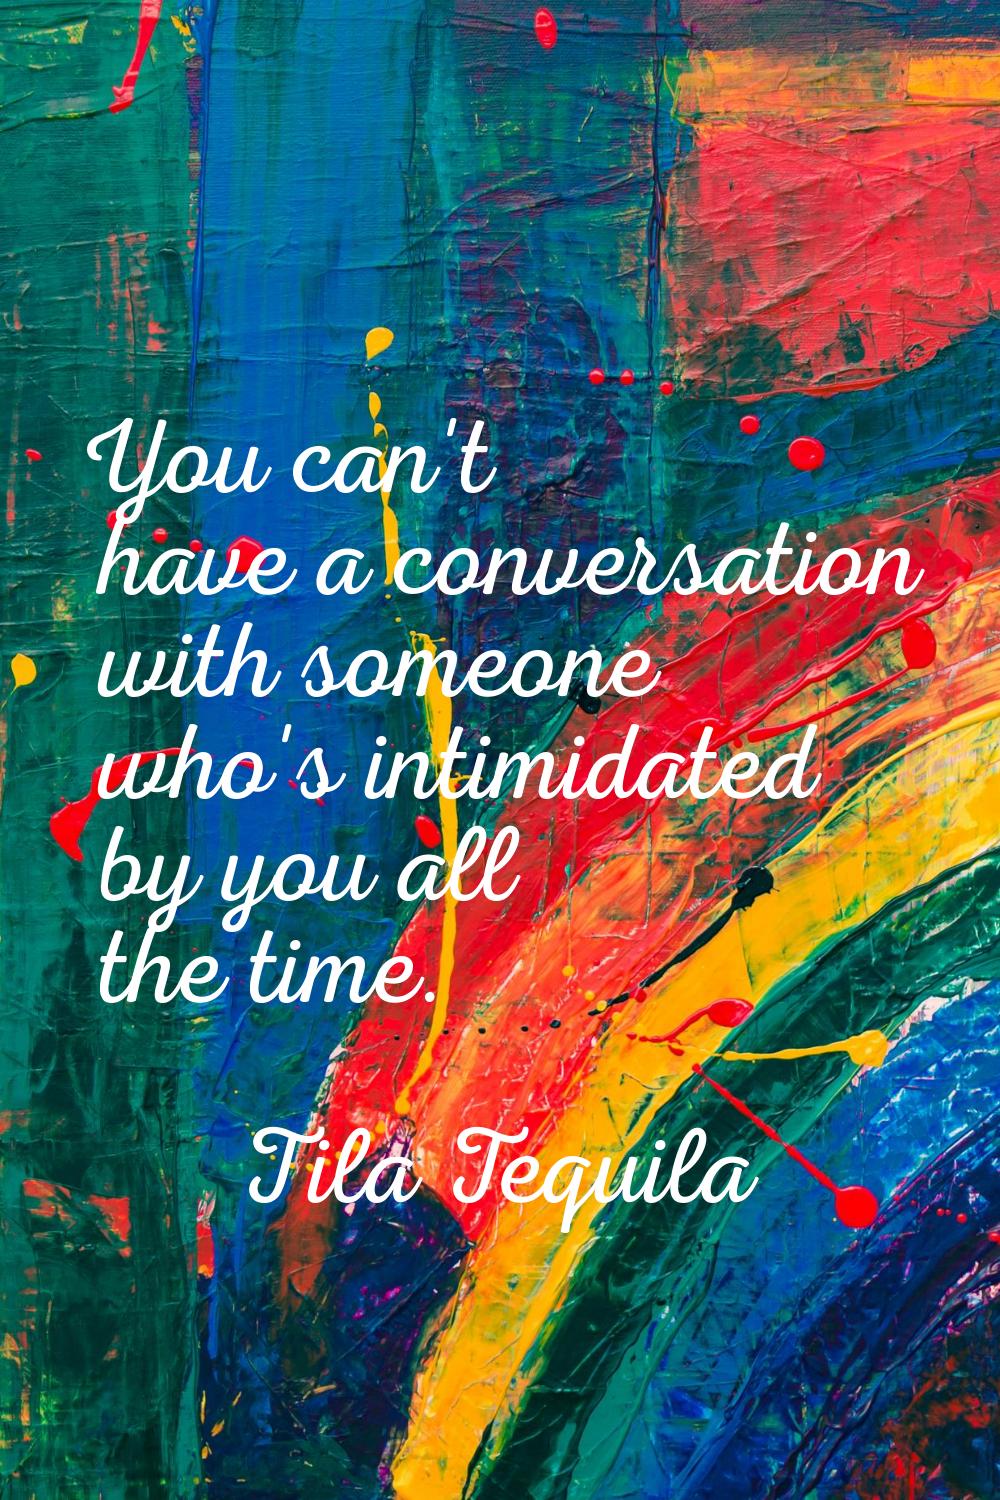 You can't have a conversation with someone who's intimidated by you all the time.